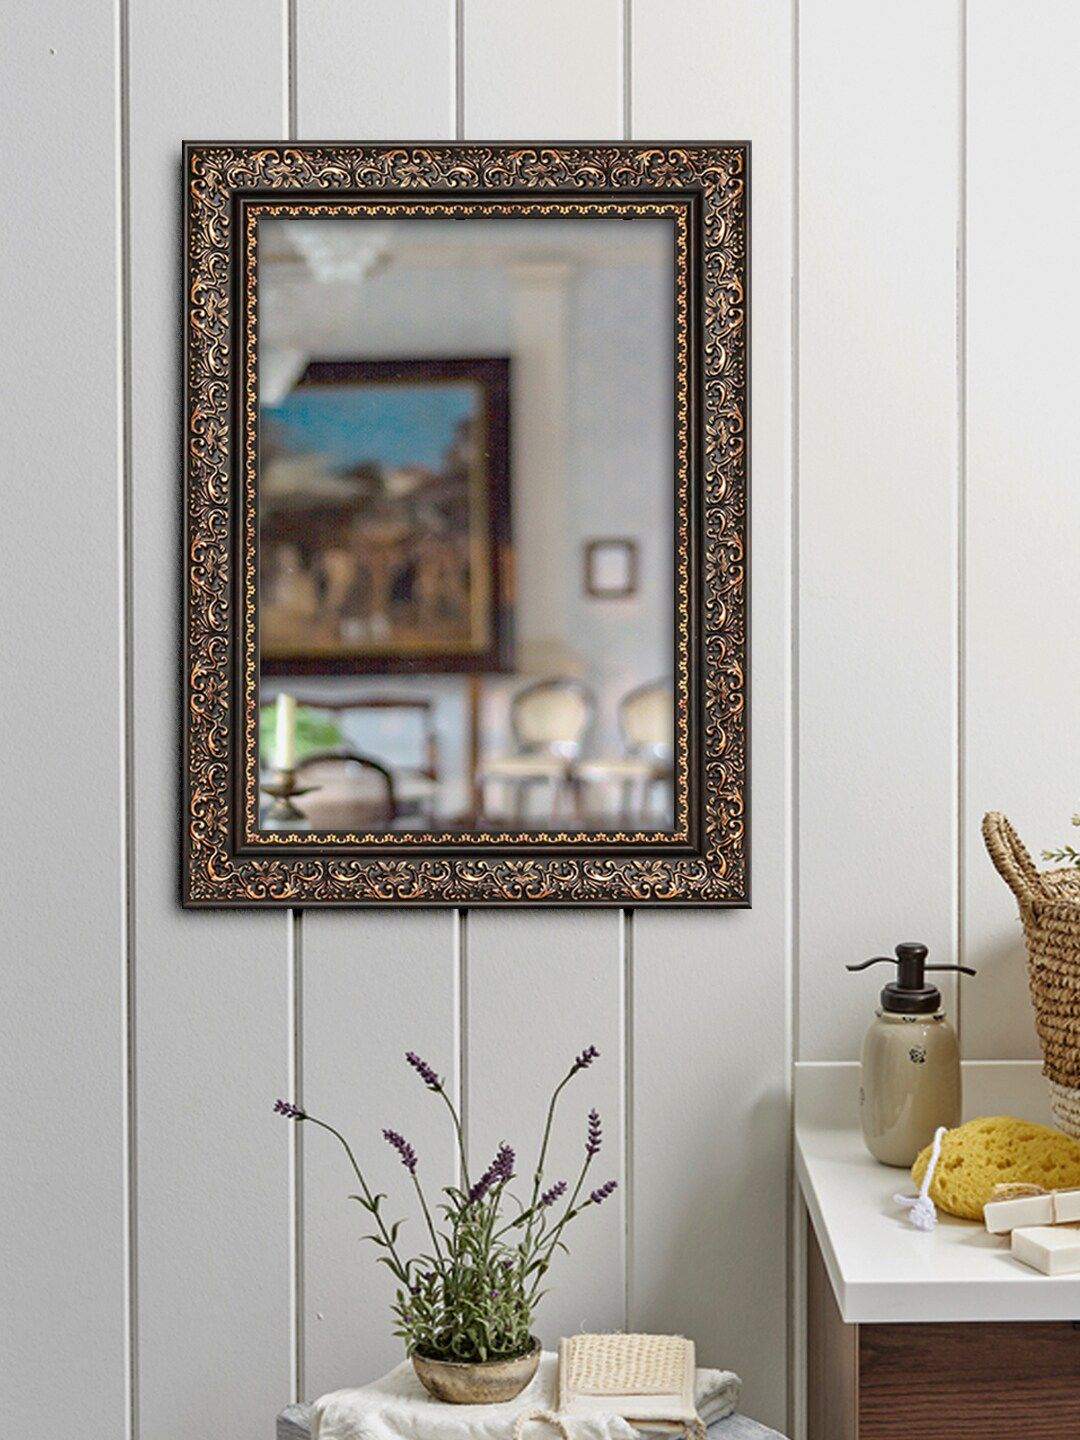 999Store Black Textured Framed Wall Mirror Price in India